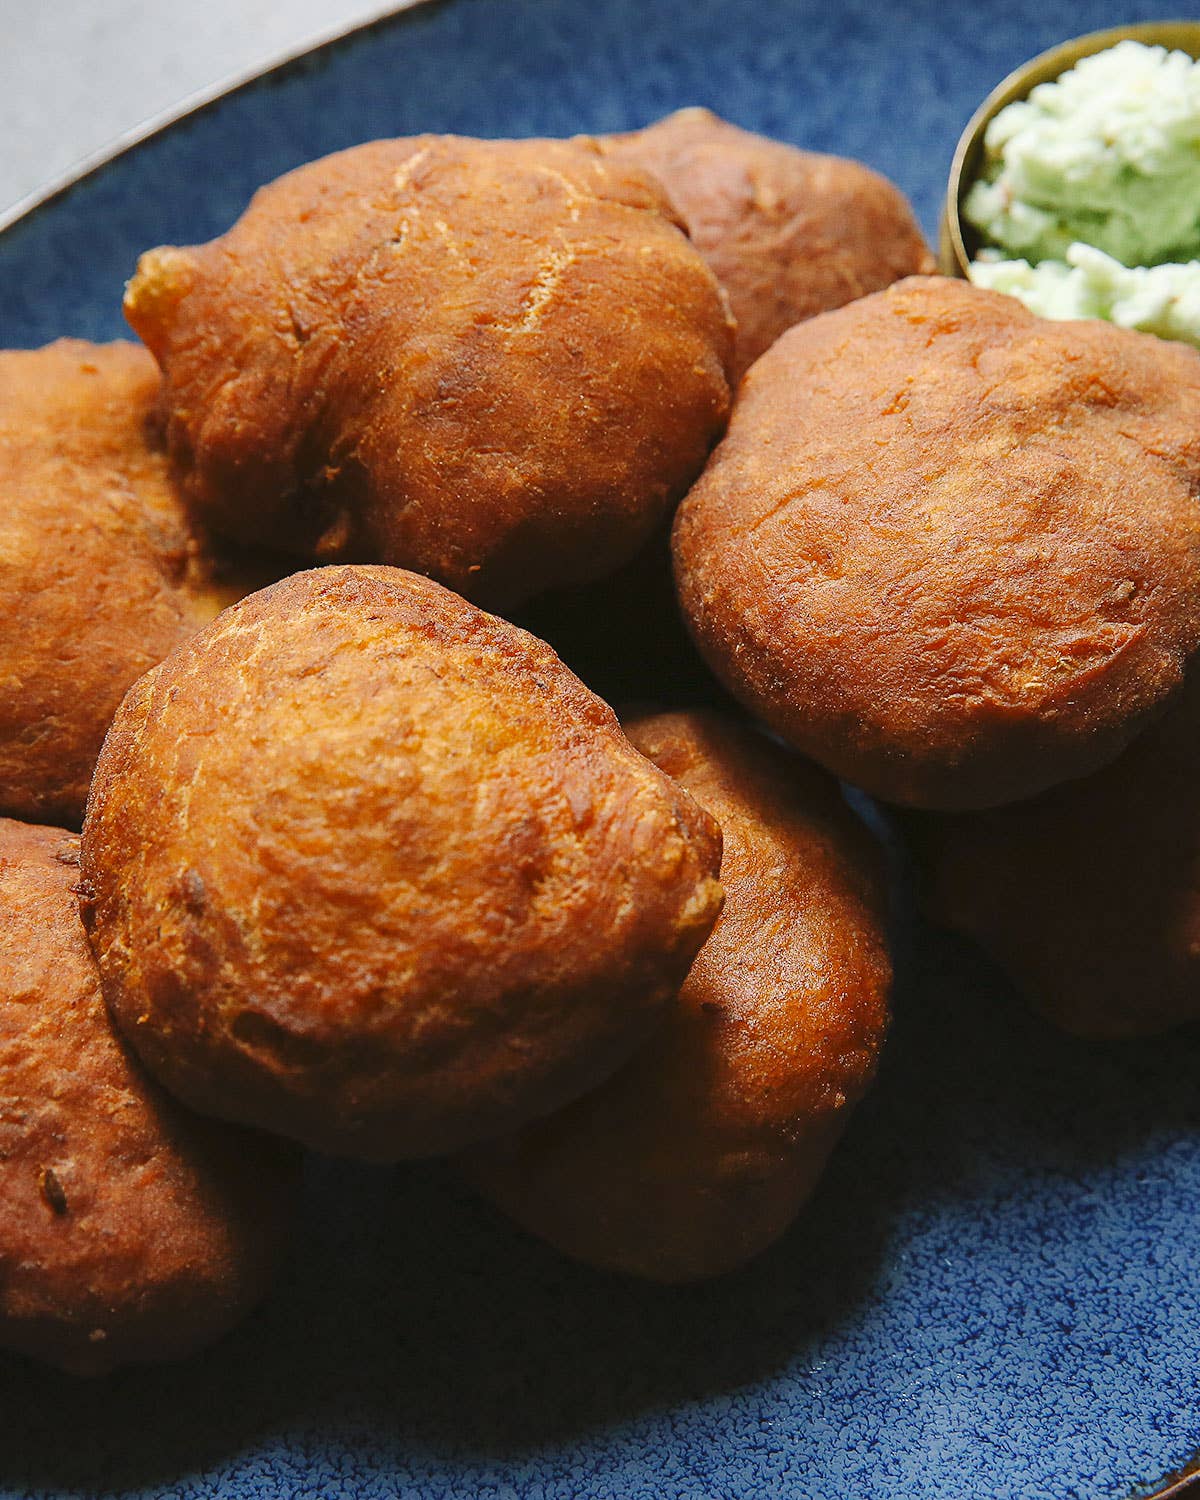 Indian Mangalore Buns Are Sweet and Spicy Fried Banana Bread